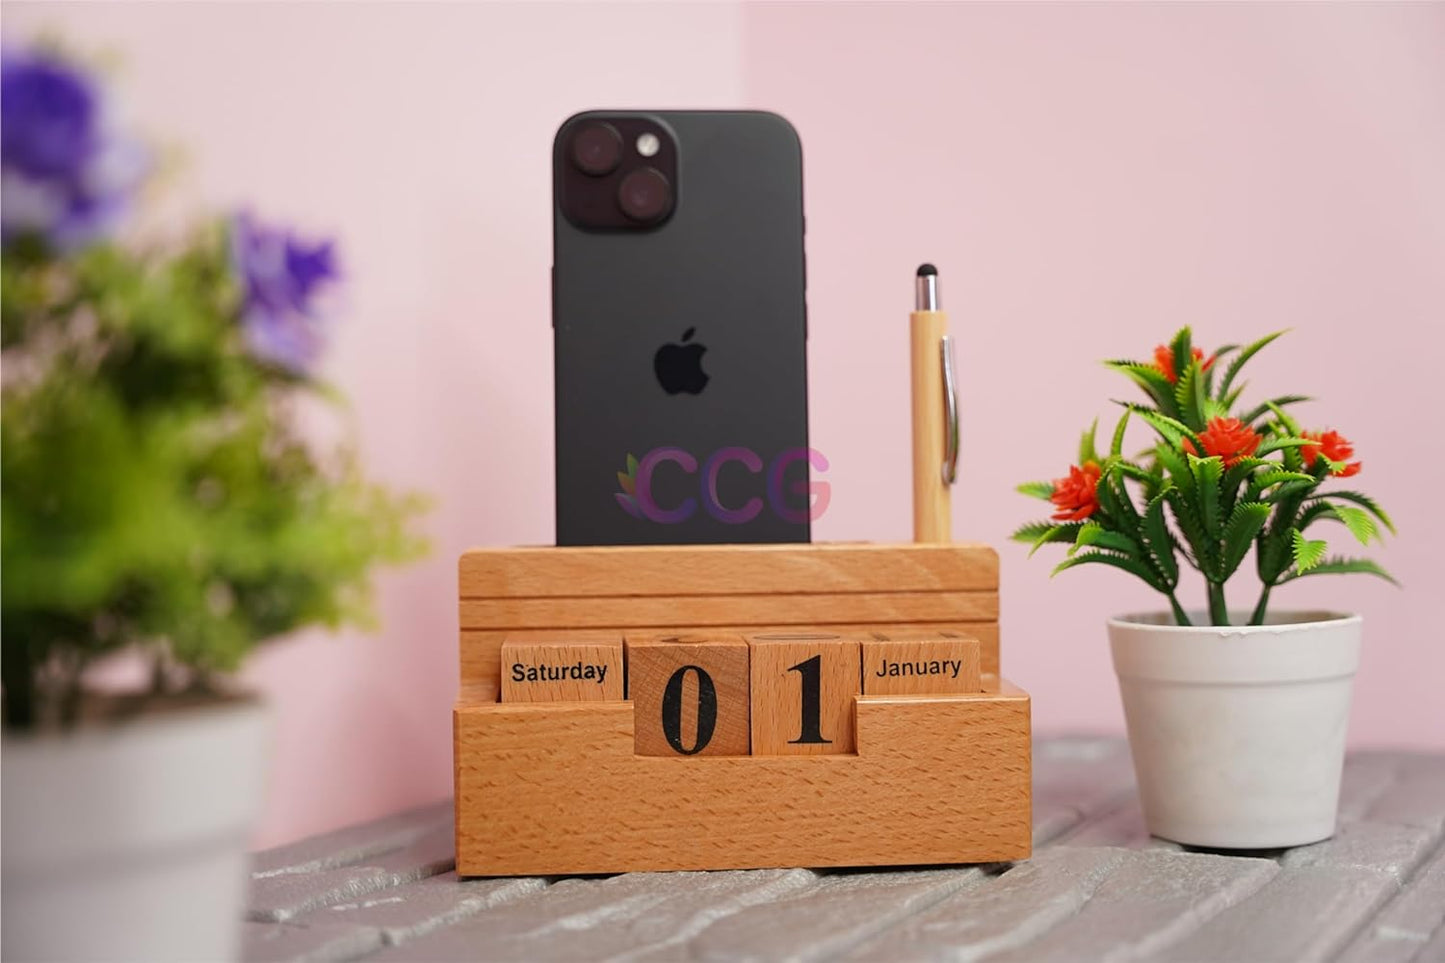 Craft Closet & Gifts - Wooden Stylish Rolling Table Calendar Design Single Pen/Pencil Holder + Mobile Stand - Personalized Office Desk Supplies Accessory for IAS, Advocate, Office & Corporate Gifts